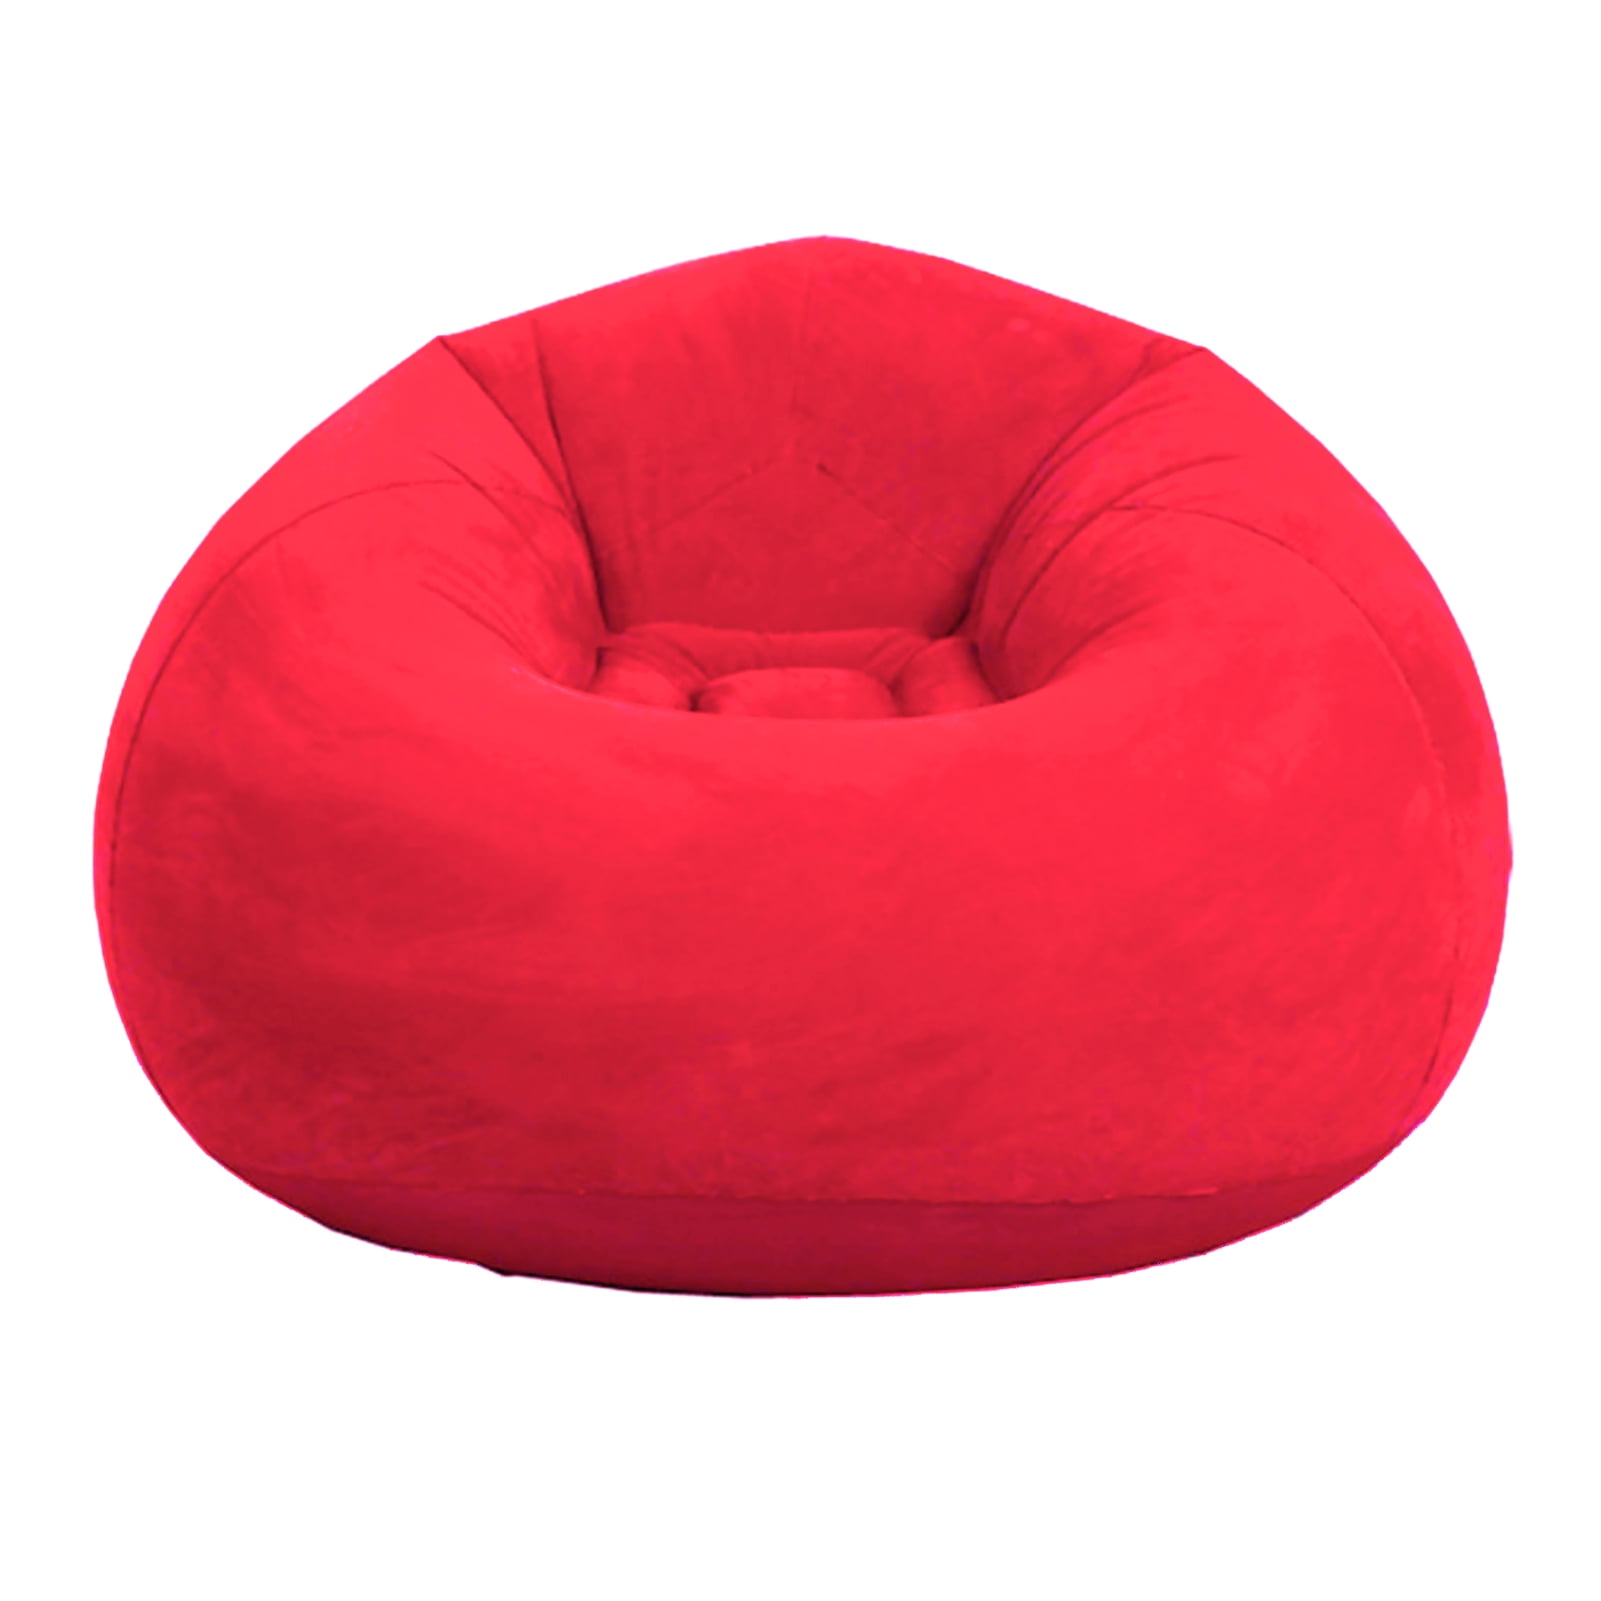 Living Room Outdoor Bean Bag Chair Lounger Ultra Soft Inflatable Lazy Sofa Couch